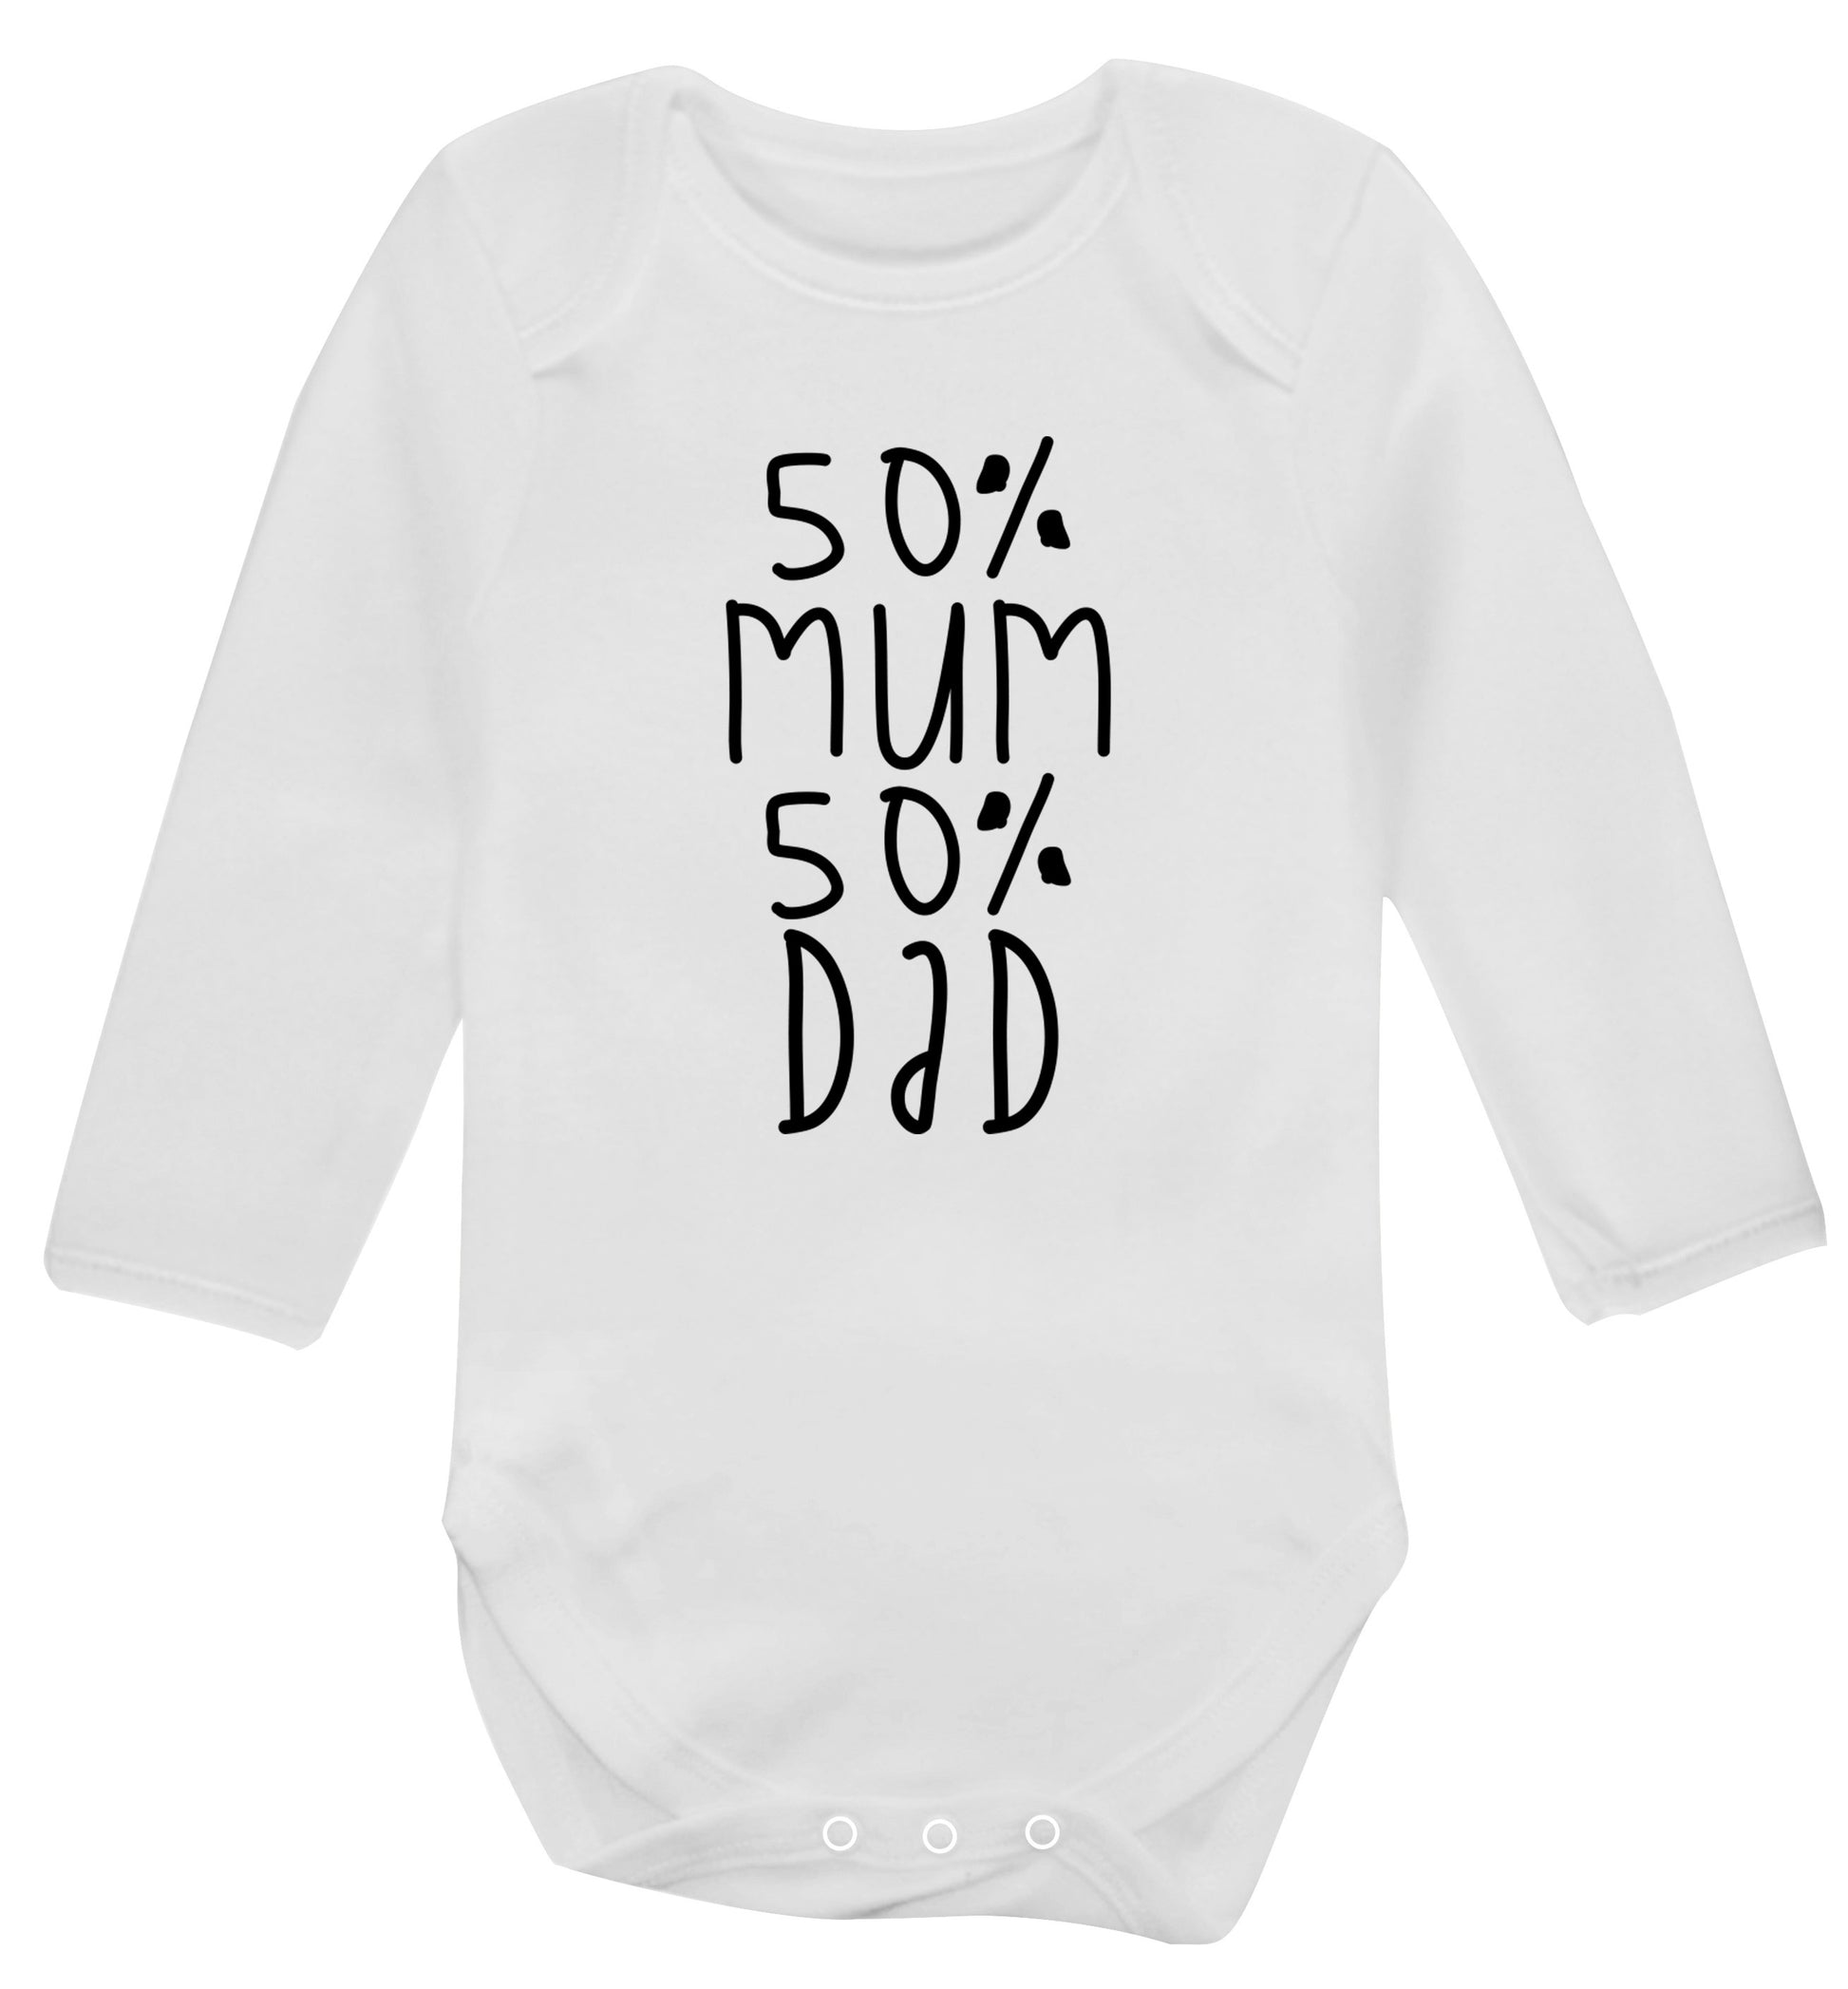 50% mum 50% dad Baby Vest long sleeved white 6-12 months